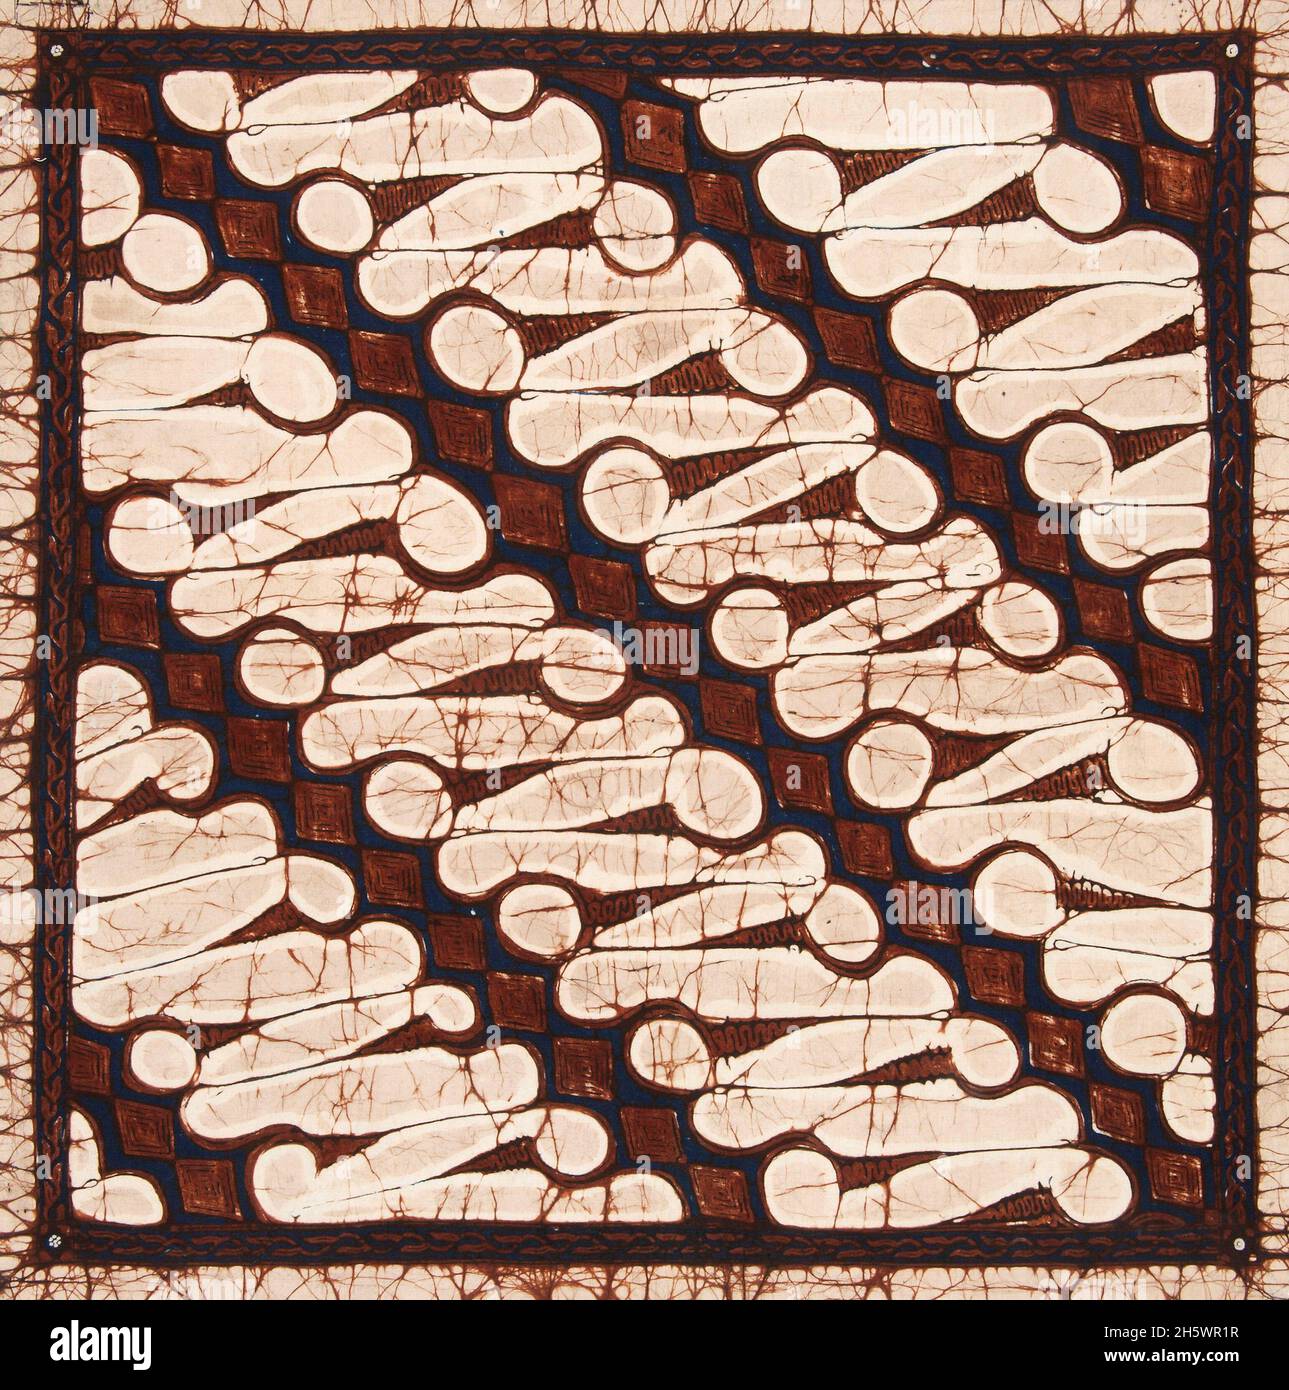 Batik pattern: Parang rusak barong This patched pattern is a very large and coarse Parang rusak pattern, the destroyed machete pattern. The name of this type of Parang pattern is Parang rusak barong, the werewolf Parang rusak. The border consists of brown leaves on a blue background. Stock Photo